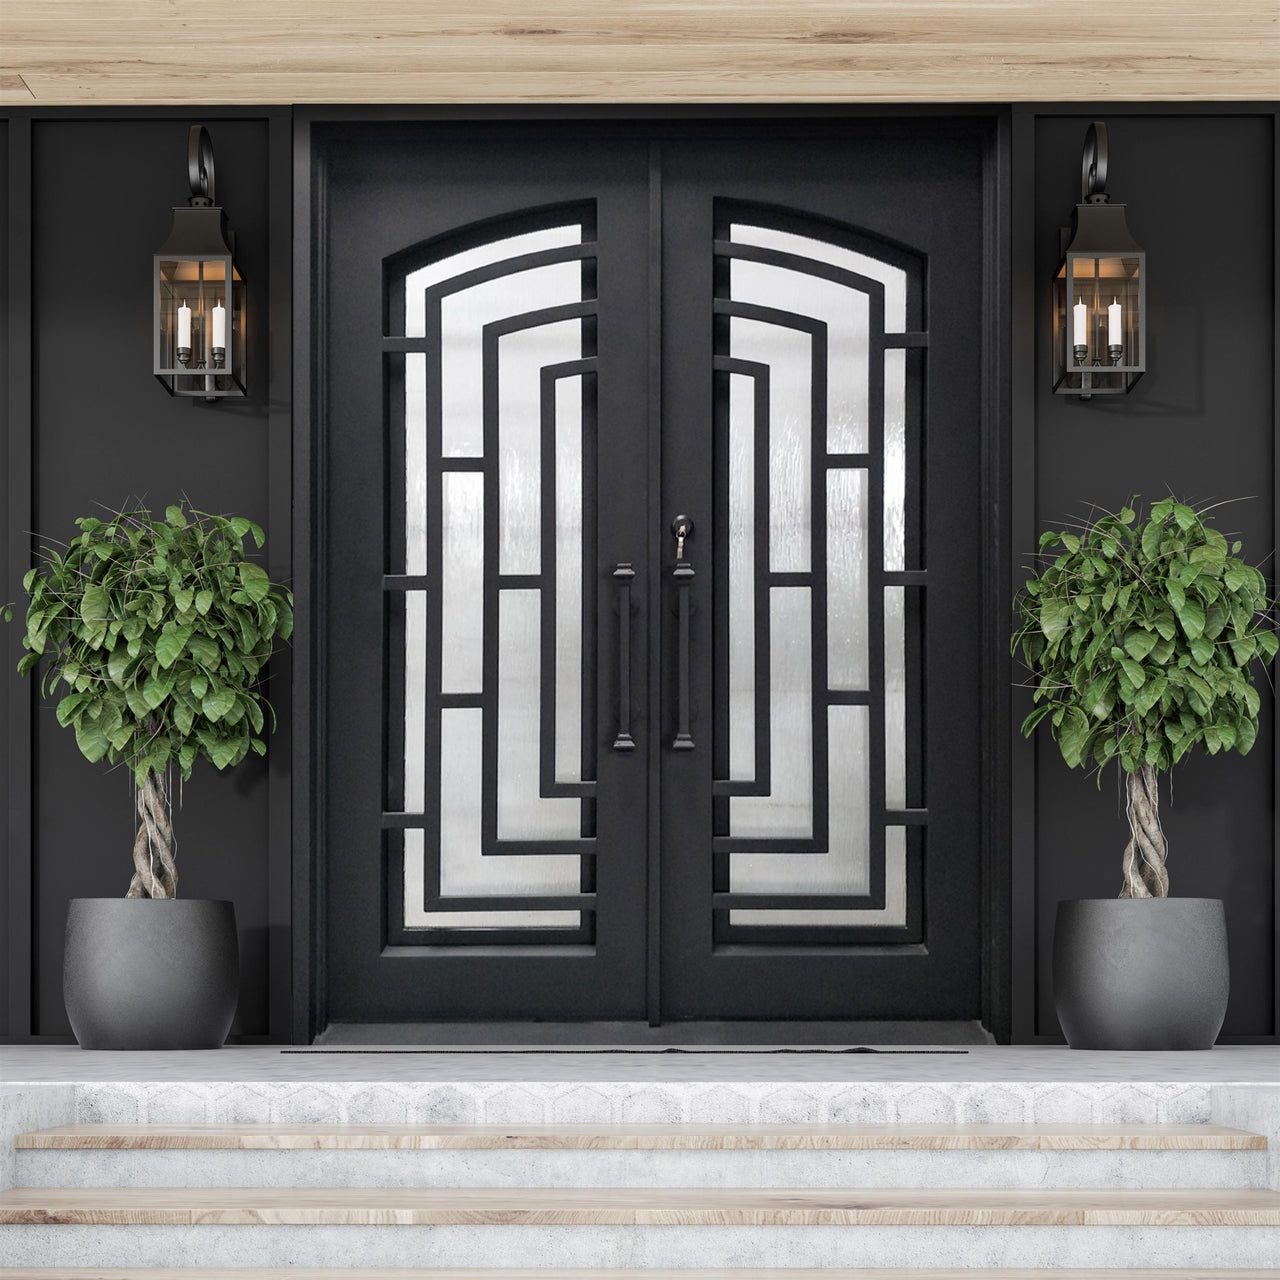 Aleko Doors Iron Square Top Modern Dual Door with Frame and Threshold - 96 x 72 x 6 Inches - Matte Black